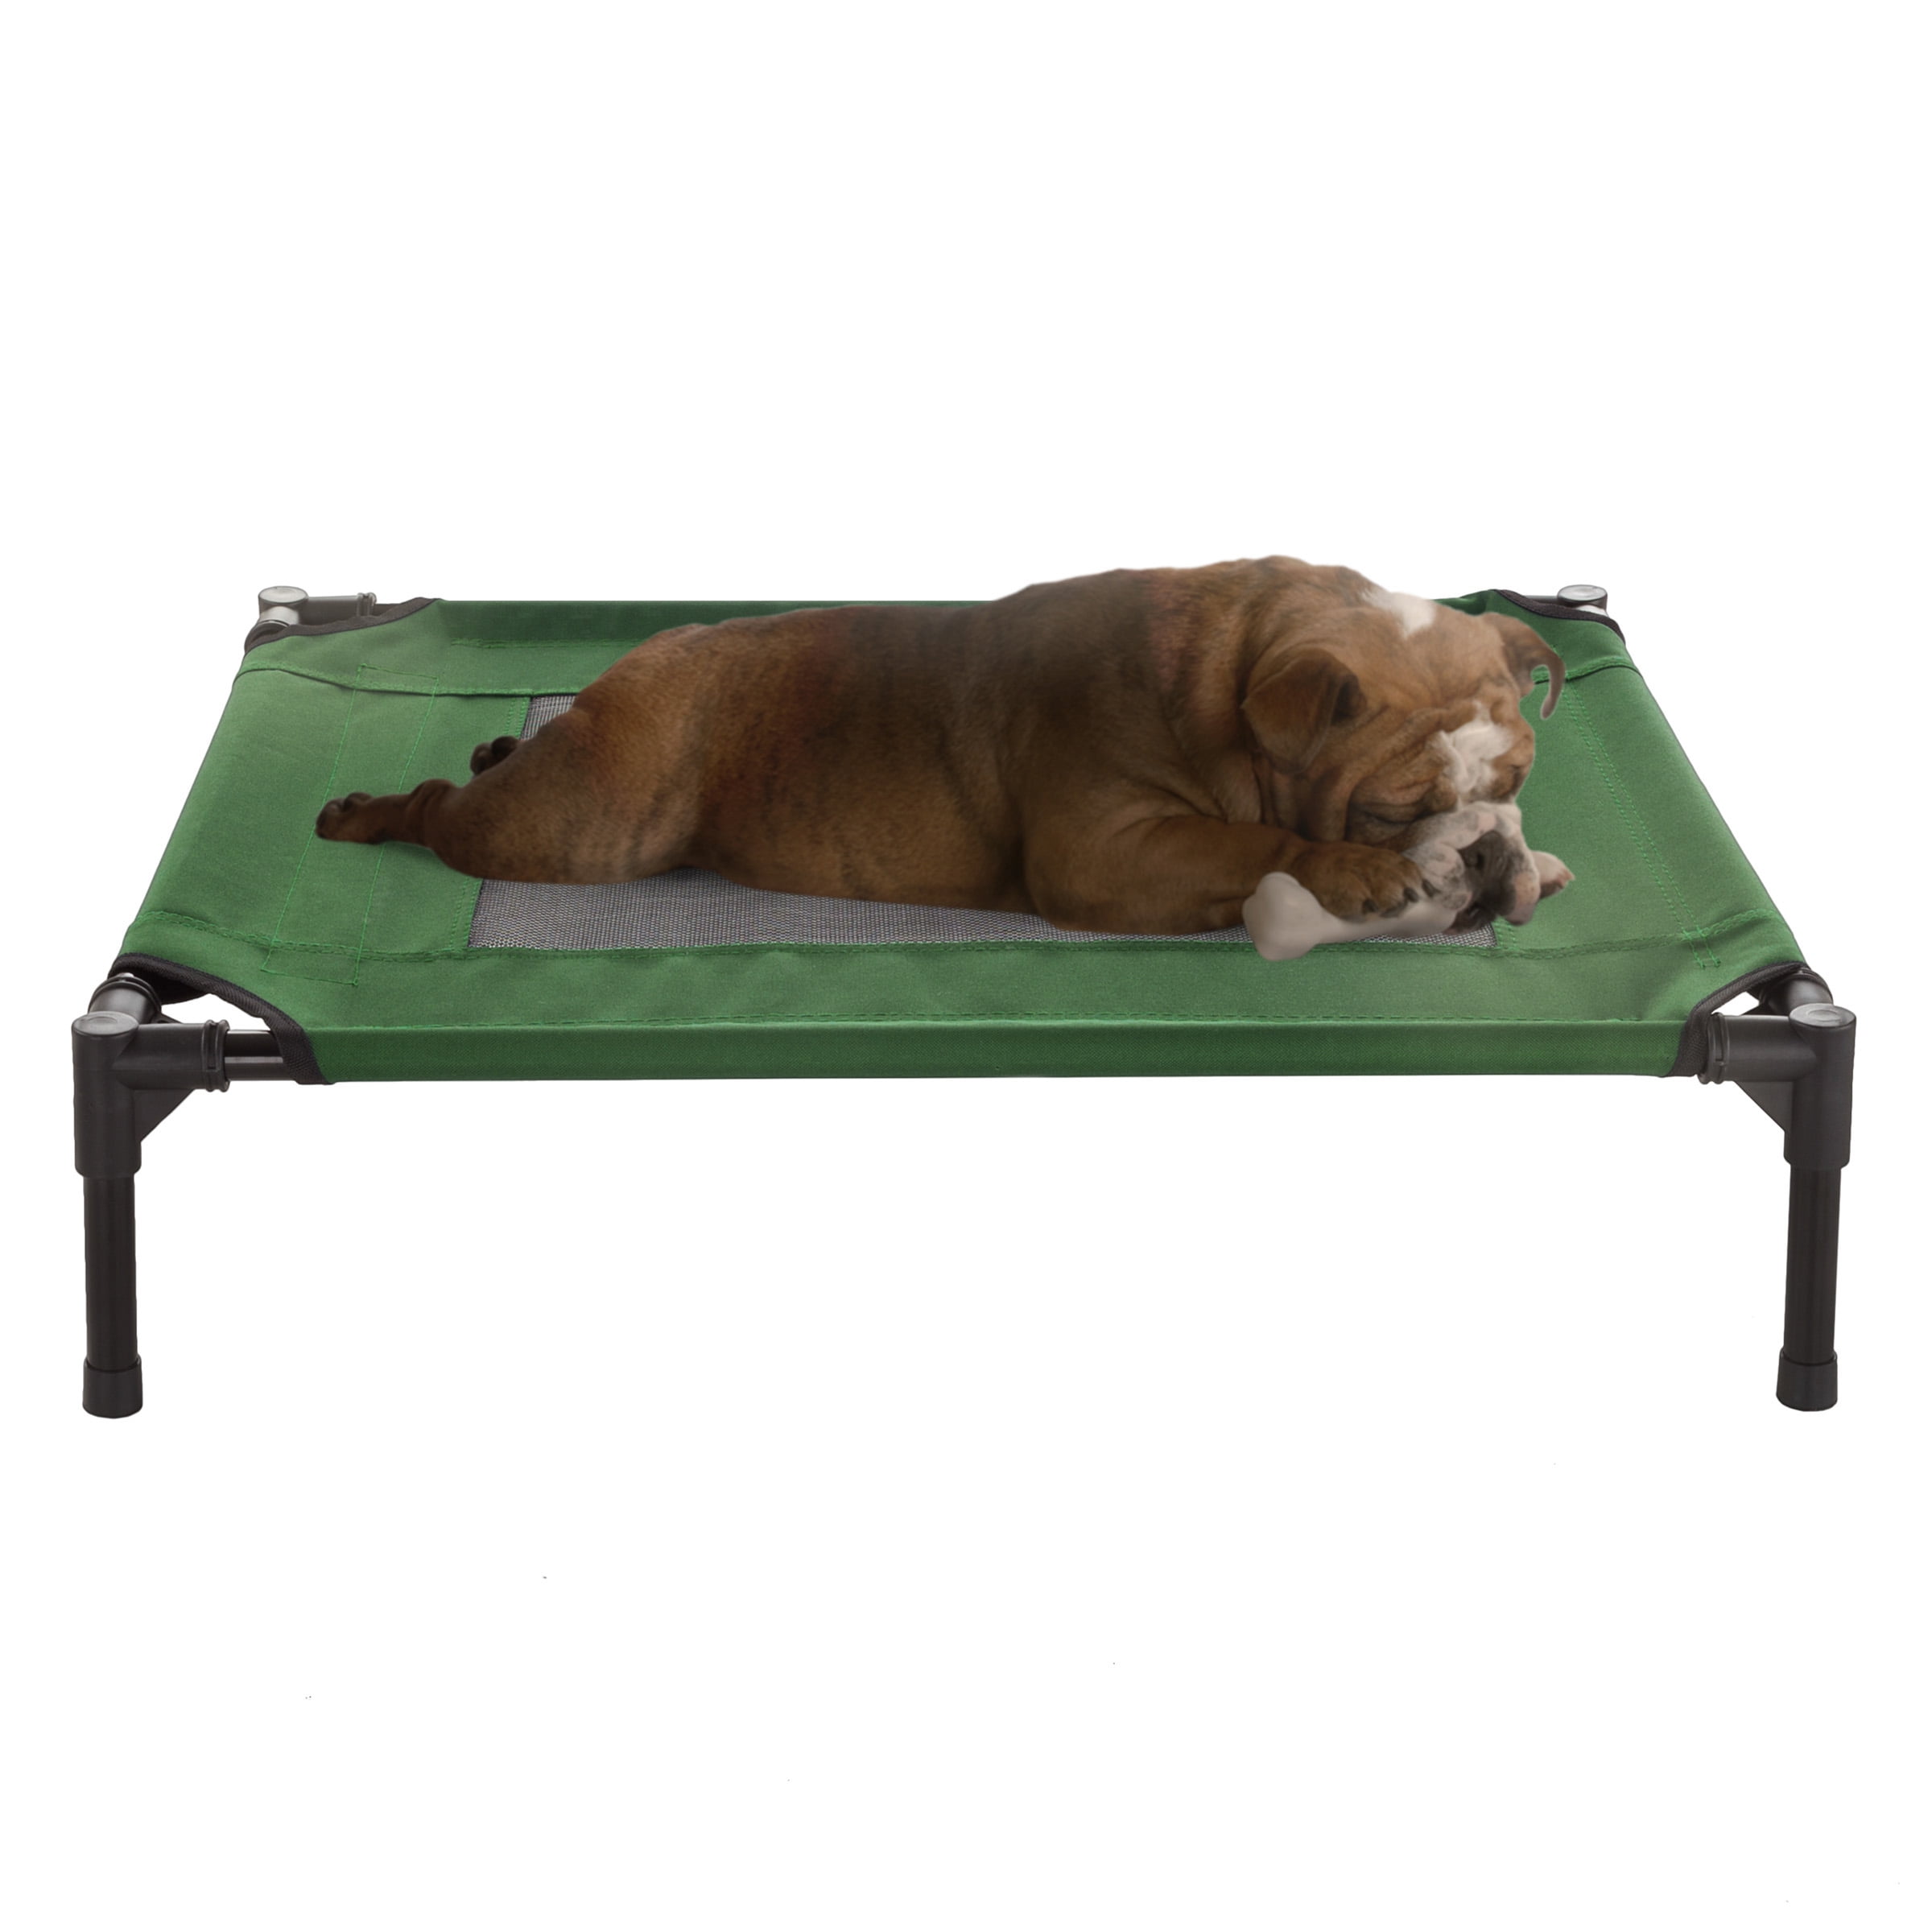 HDP Elevated Napper Cot Space Saver Pet Bed Color:Blue